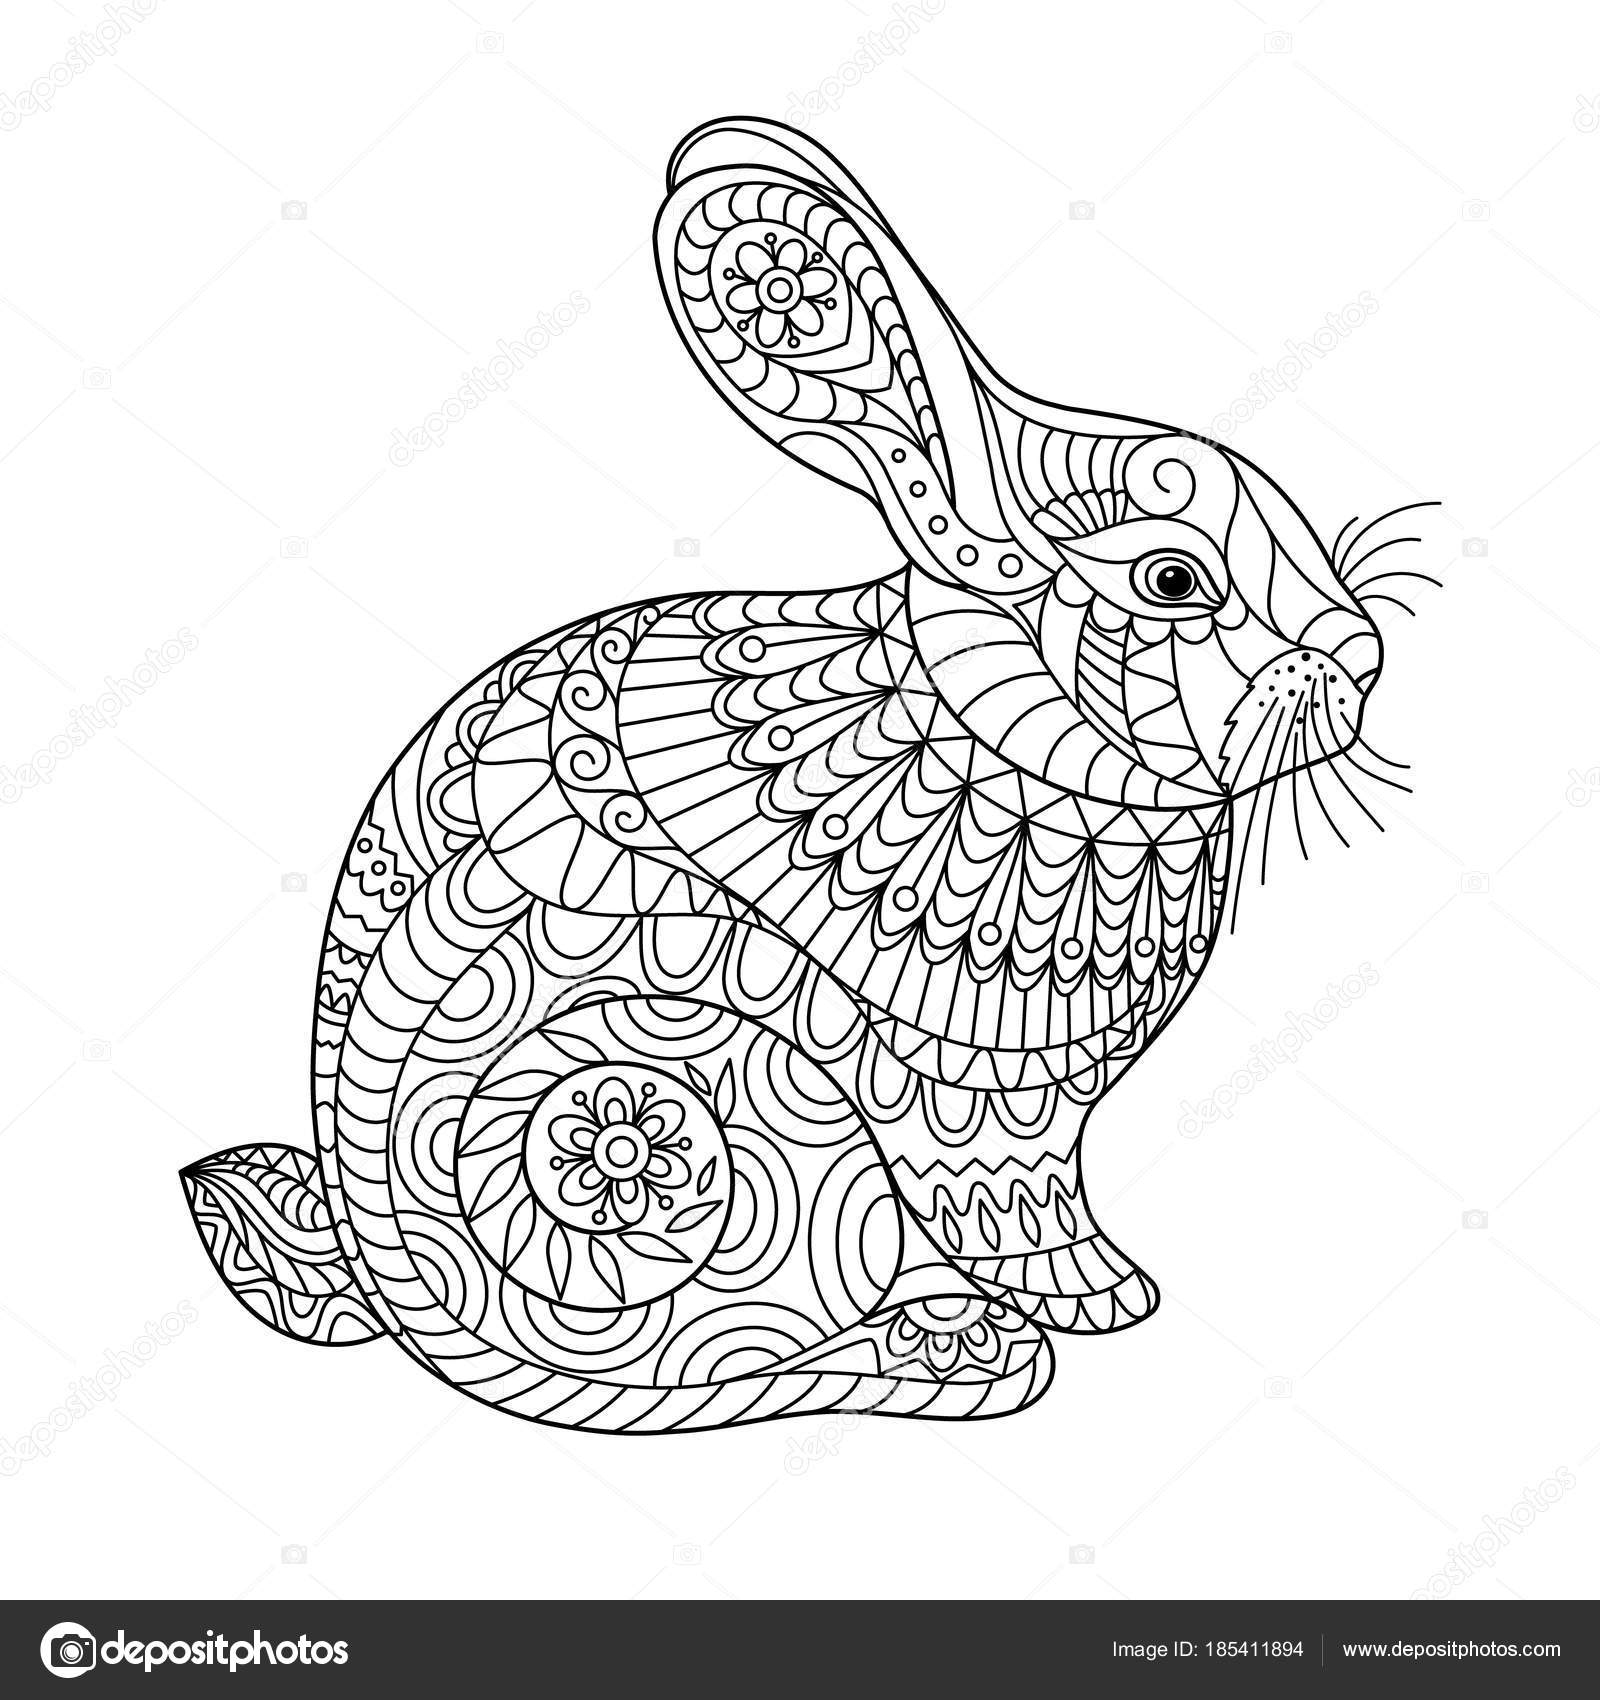 Rabbit coloring page adult children creative cute bunny black white stock vector by olgart